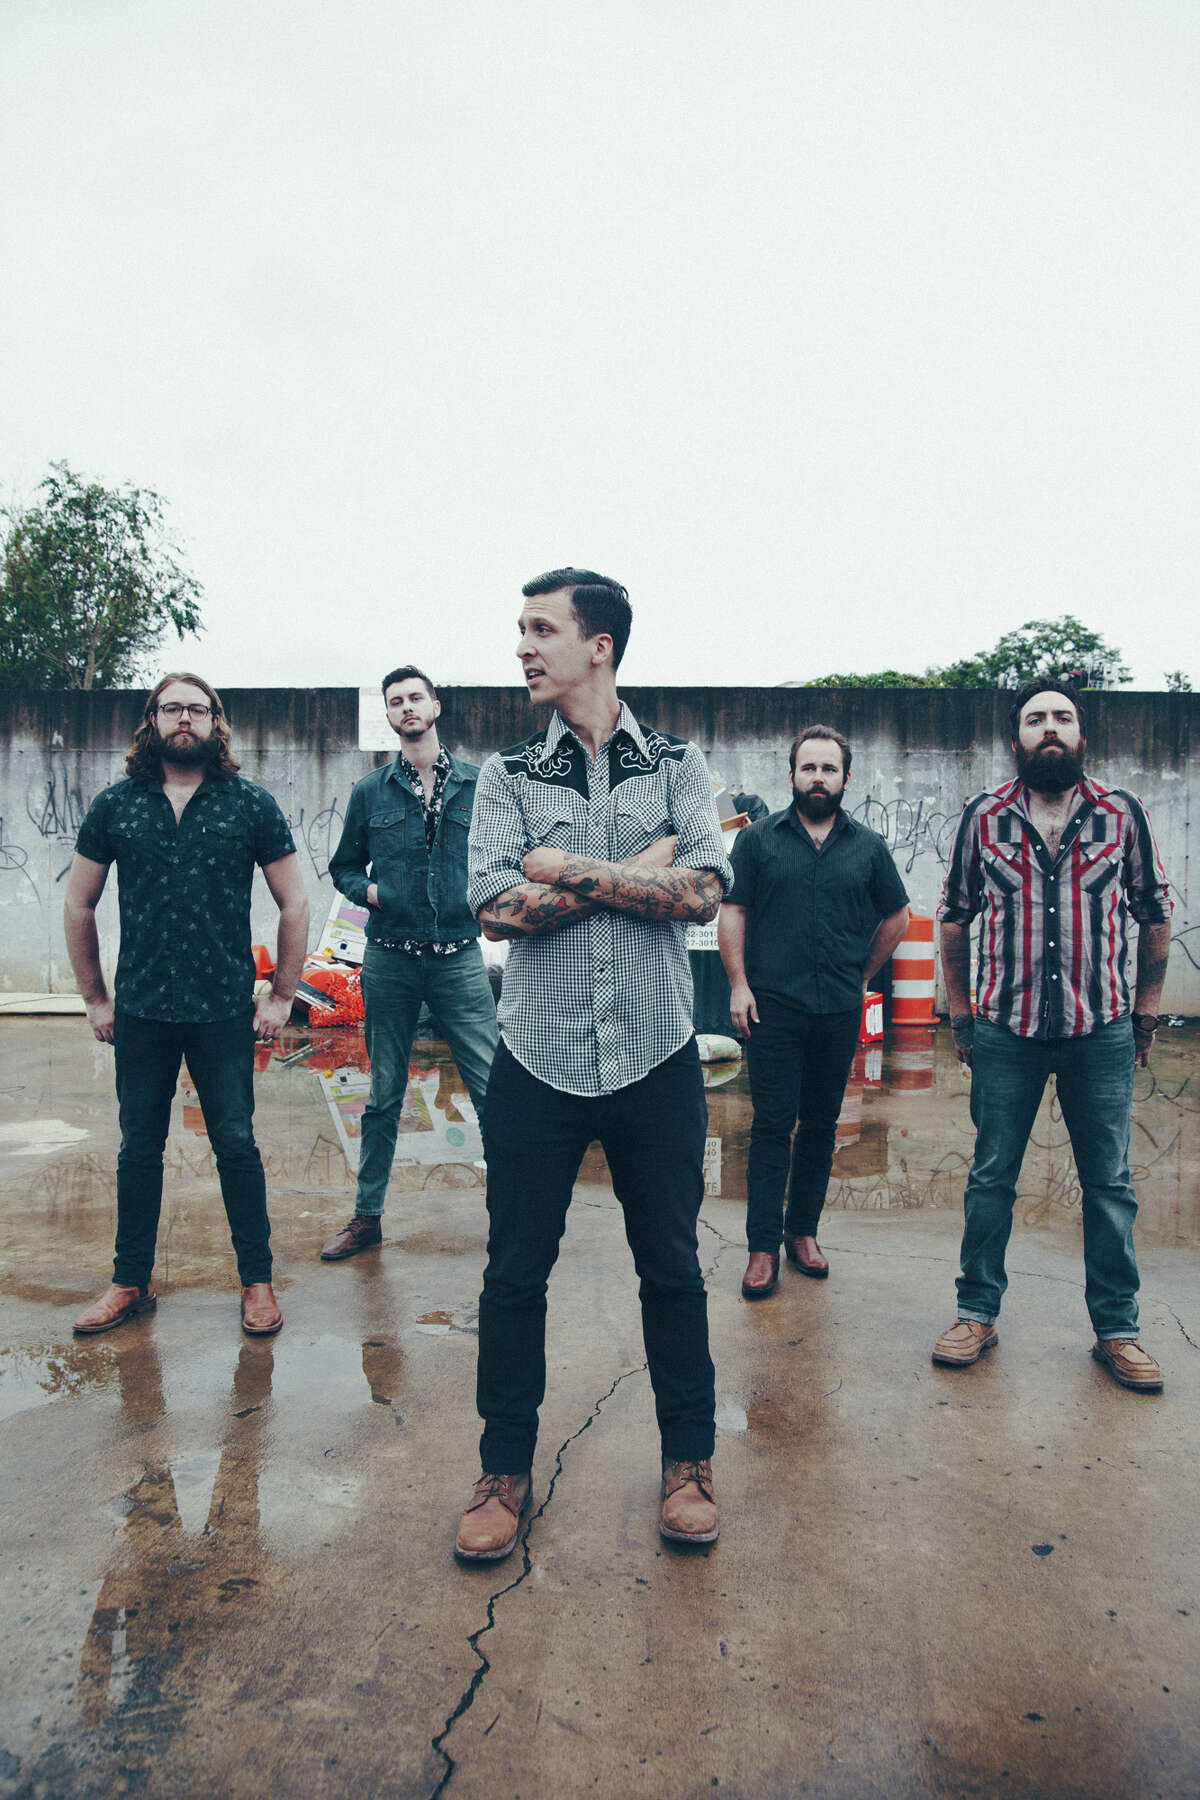 With a fresh roster of musicians American Aquarium head to Rockin' Rodeo Jan. 18 at 8 p.m.